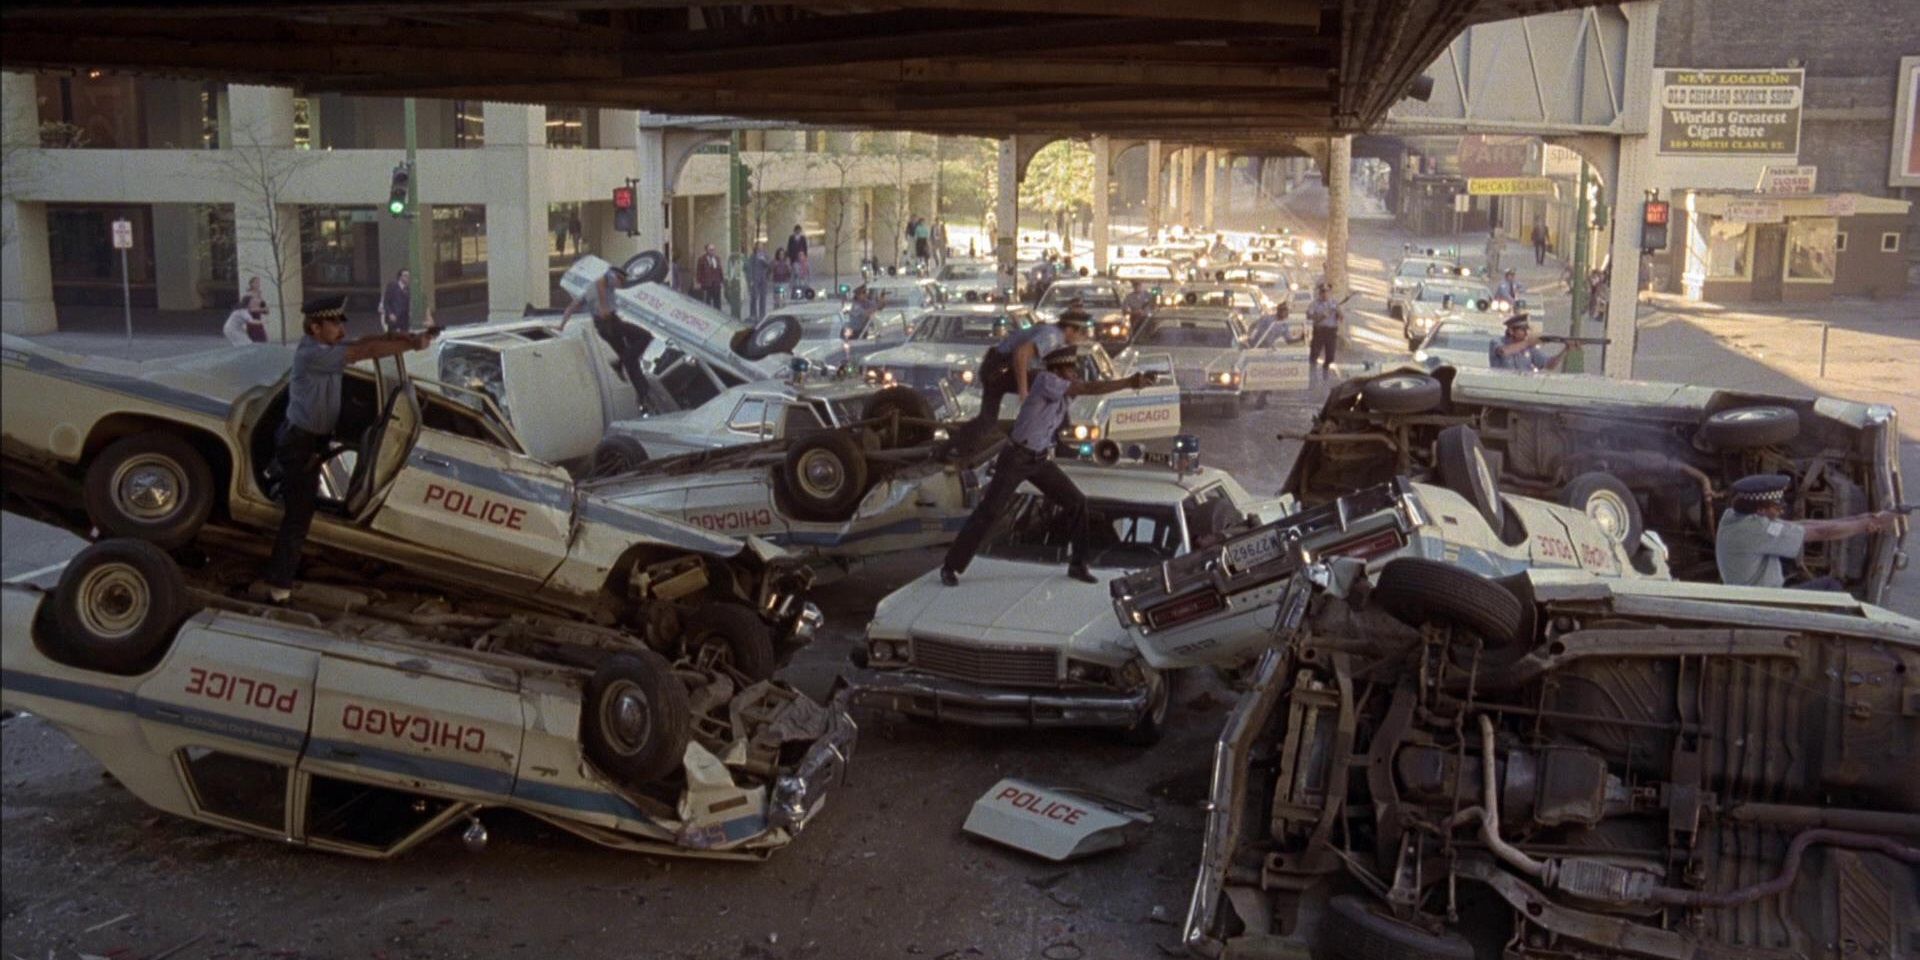 The police pileup in The Blues Brothers